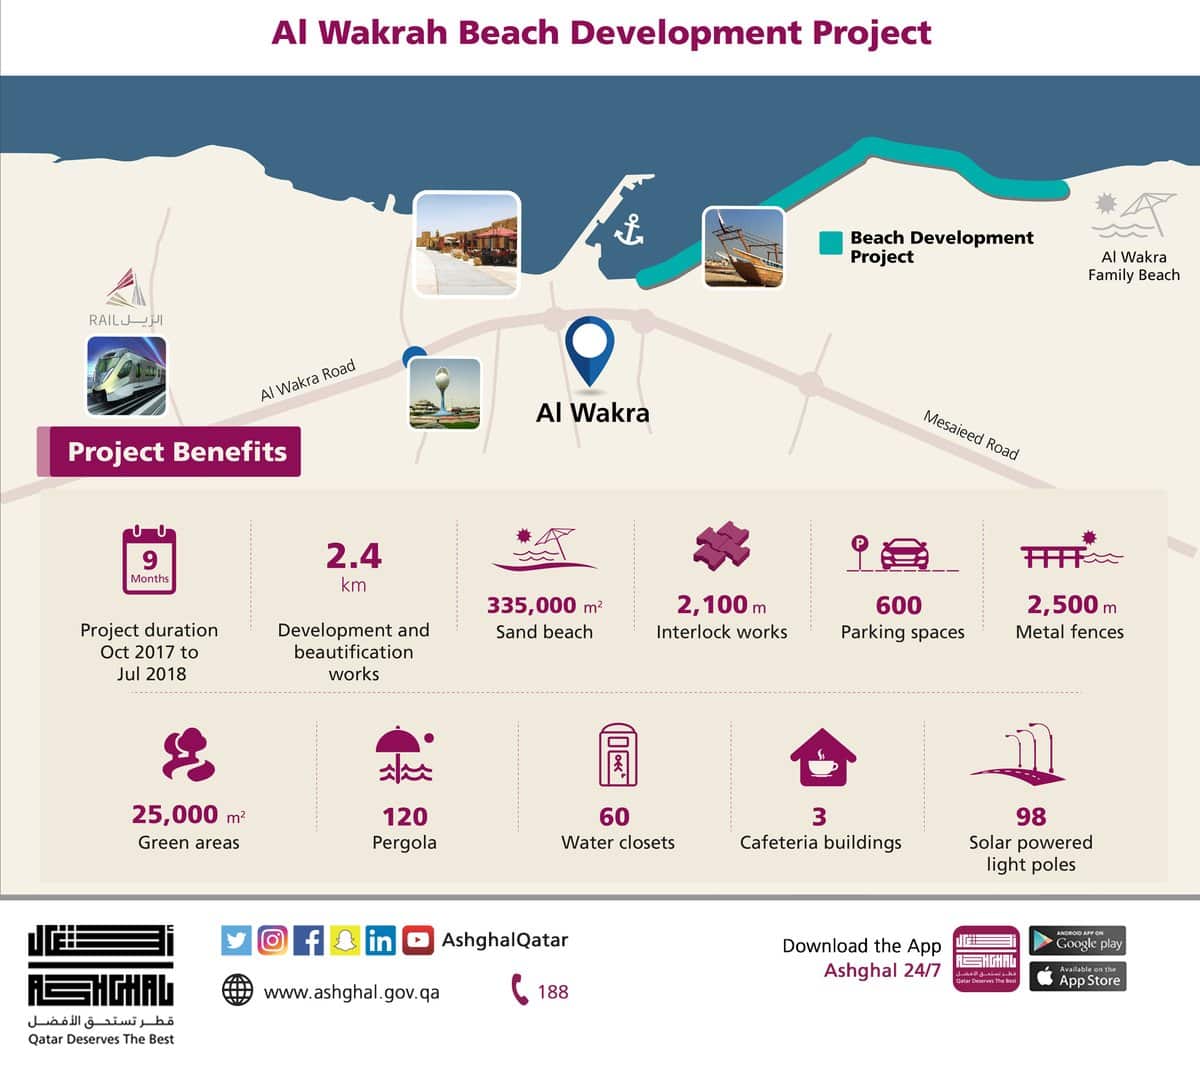 Al Wakrah Beach Development Project Opening to public on 15 May 2018